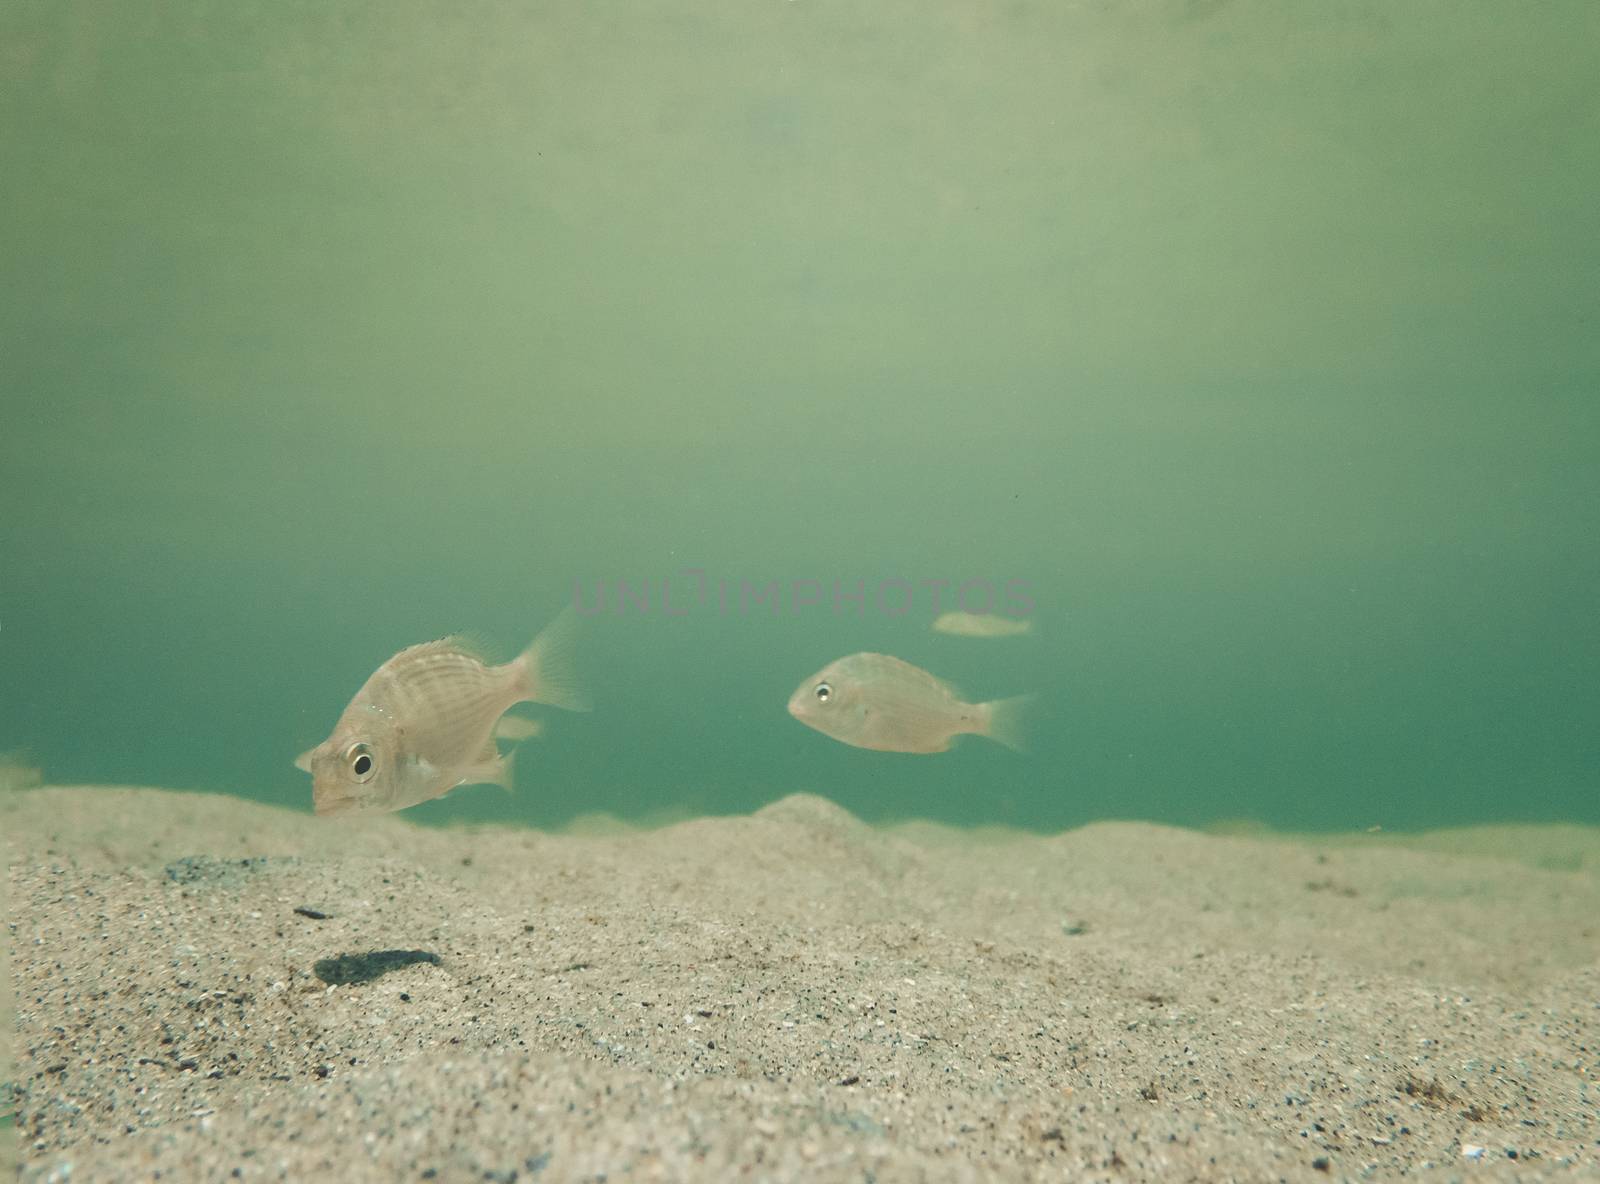 Baby fish swimming along the sandy sea floor by lovleah